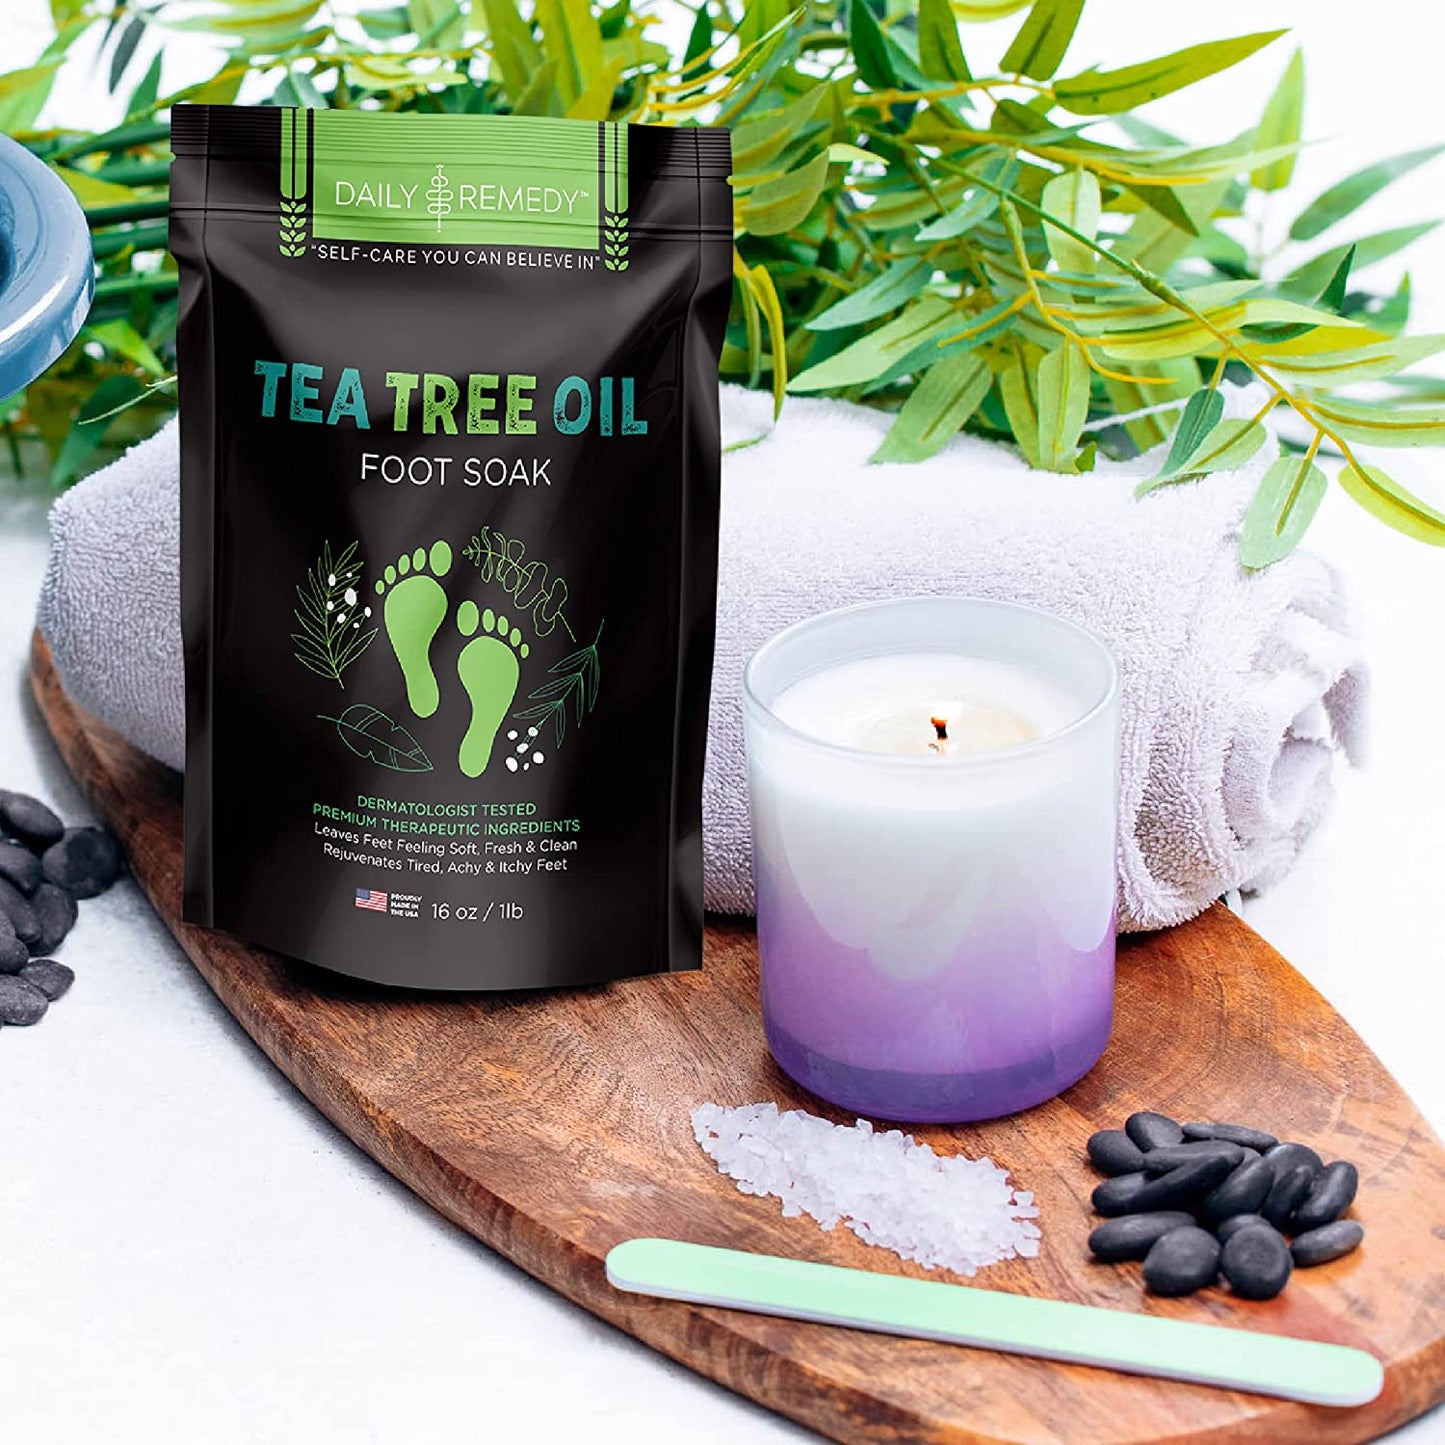 Tea Tree Oil Foot Soak with Epsom Salt - Made in USA - for Toenail Irritations, Athletes Foot, Stubborn Foot Odor Scent, Softens Calluses & Soothes Sore Tired Feet - 2 PACK